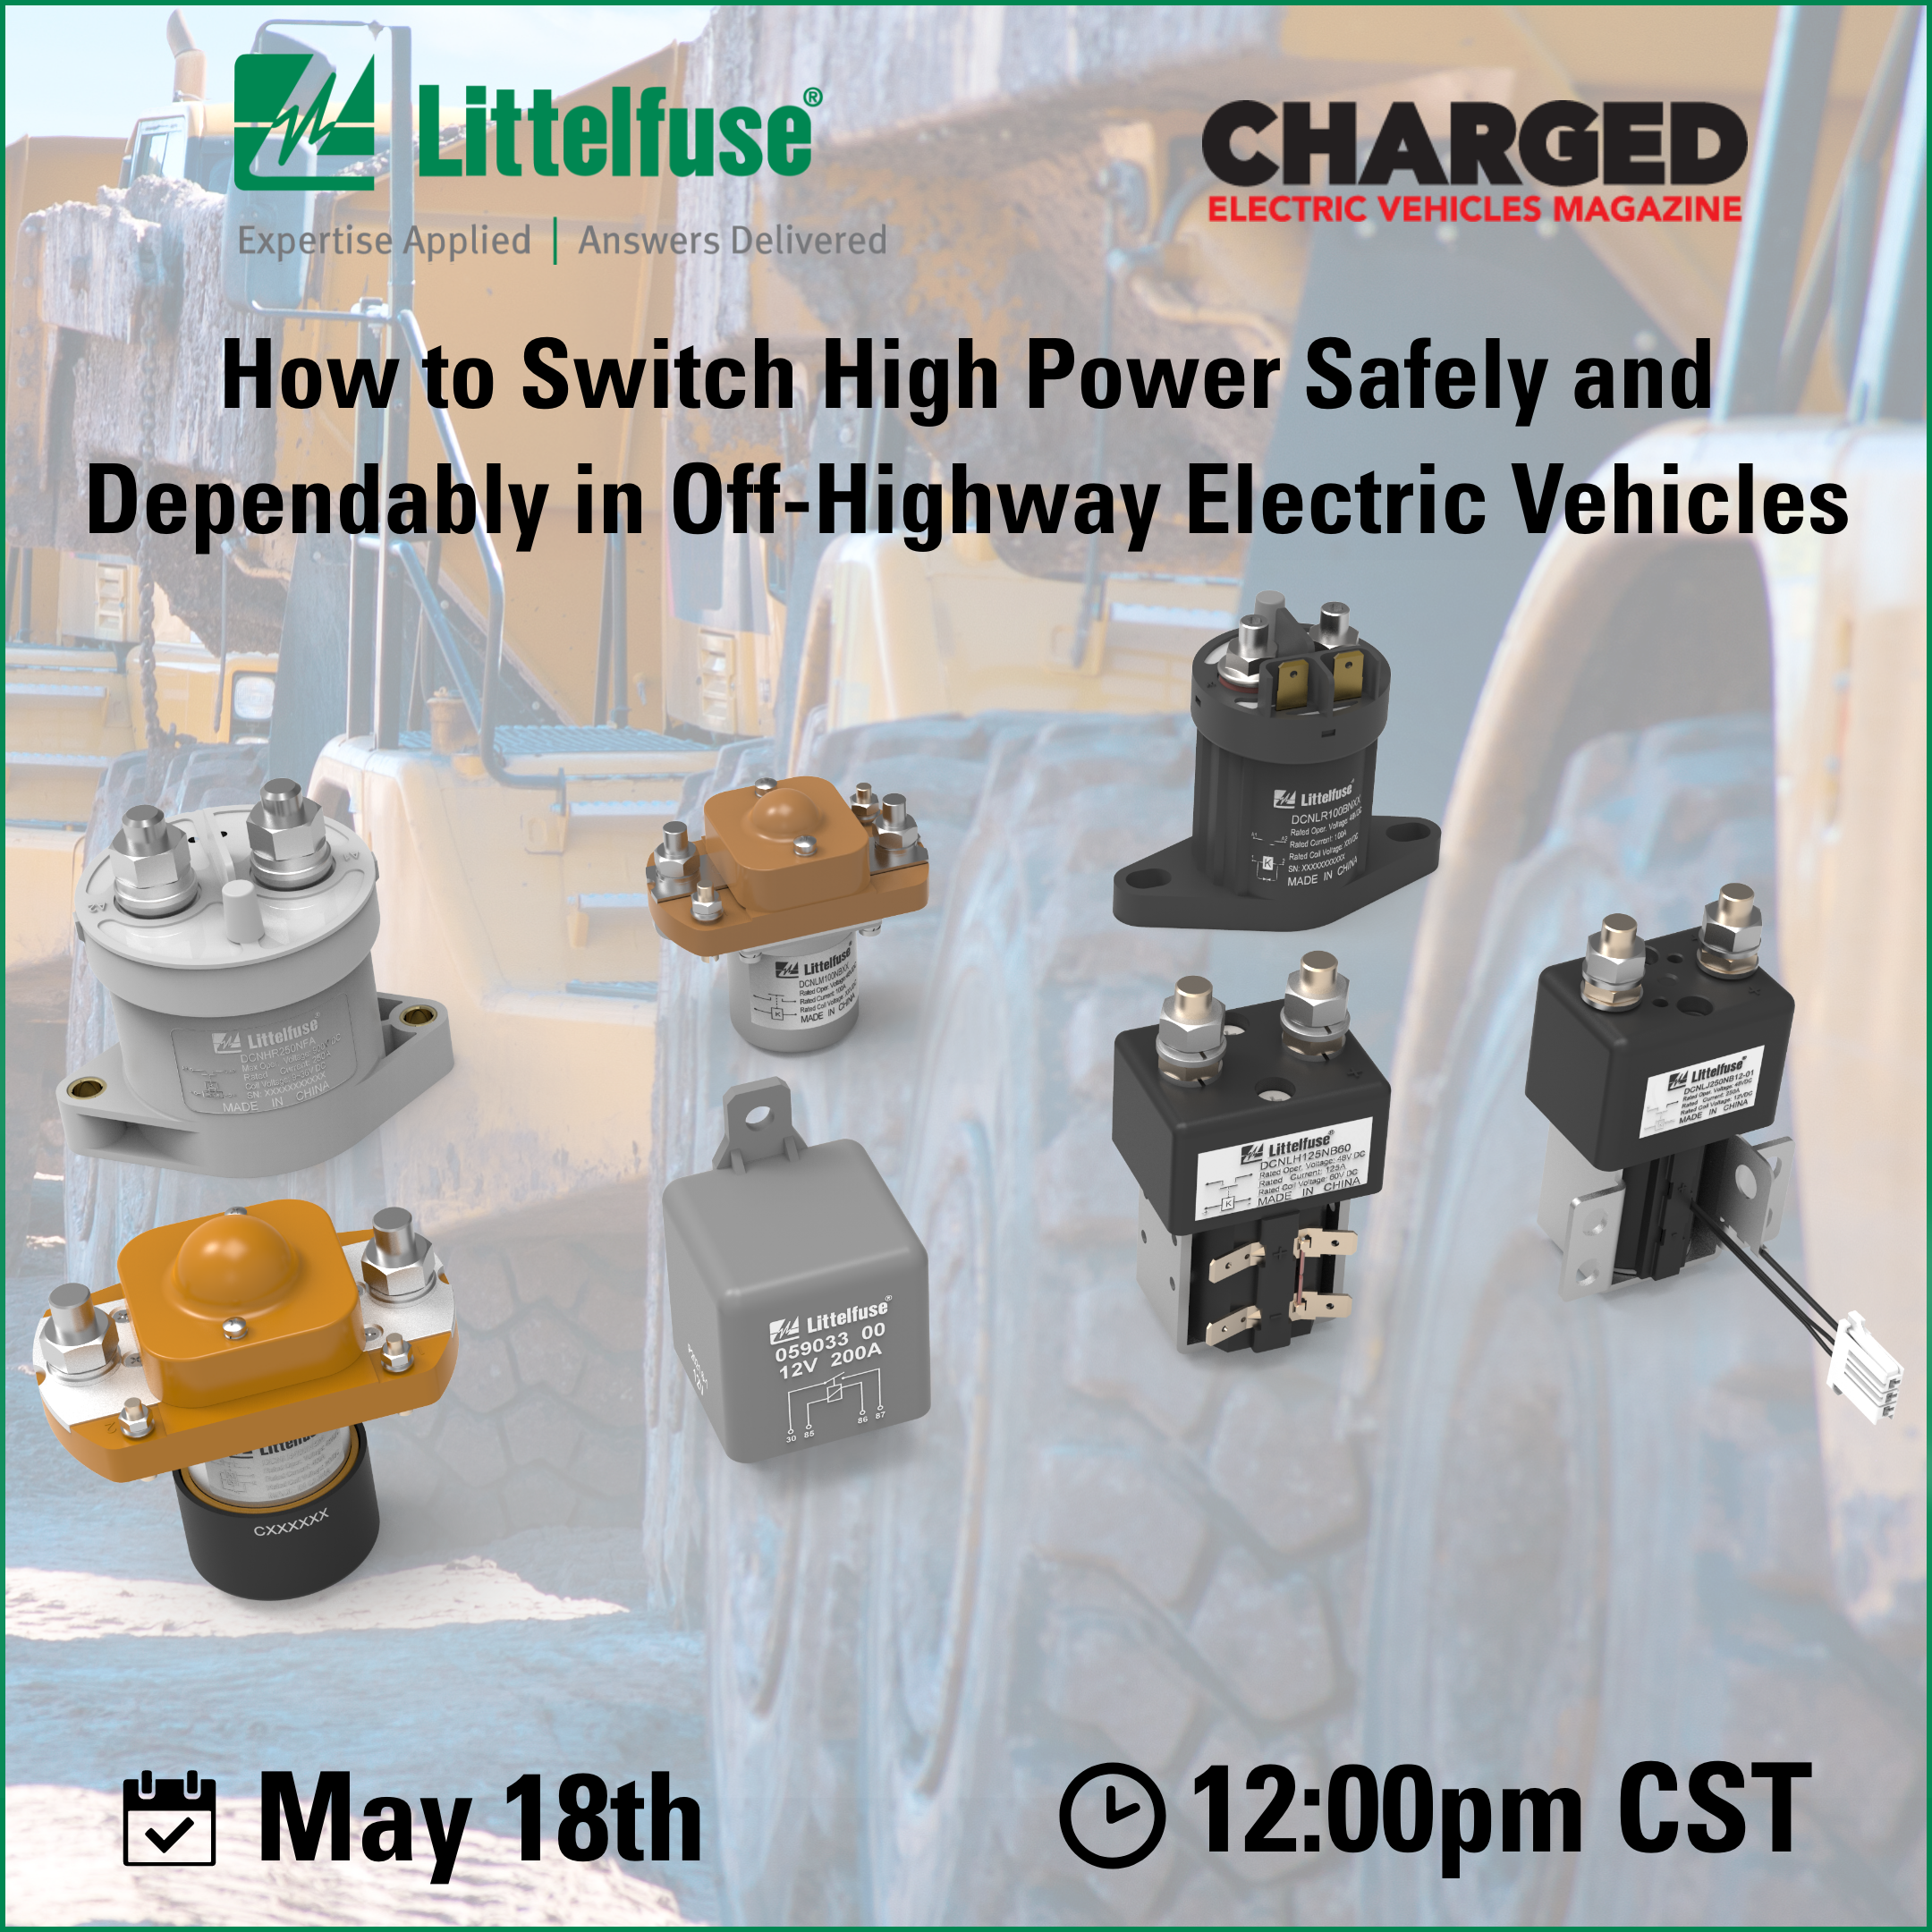 Upcoming Webinar: Switching Power in Off-Highway Electric Vehicles